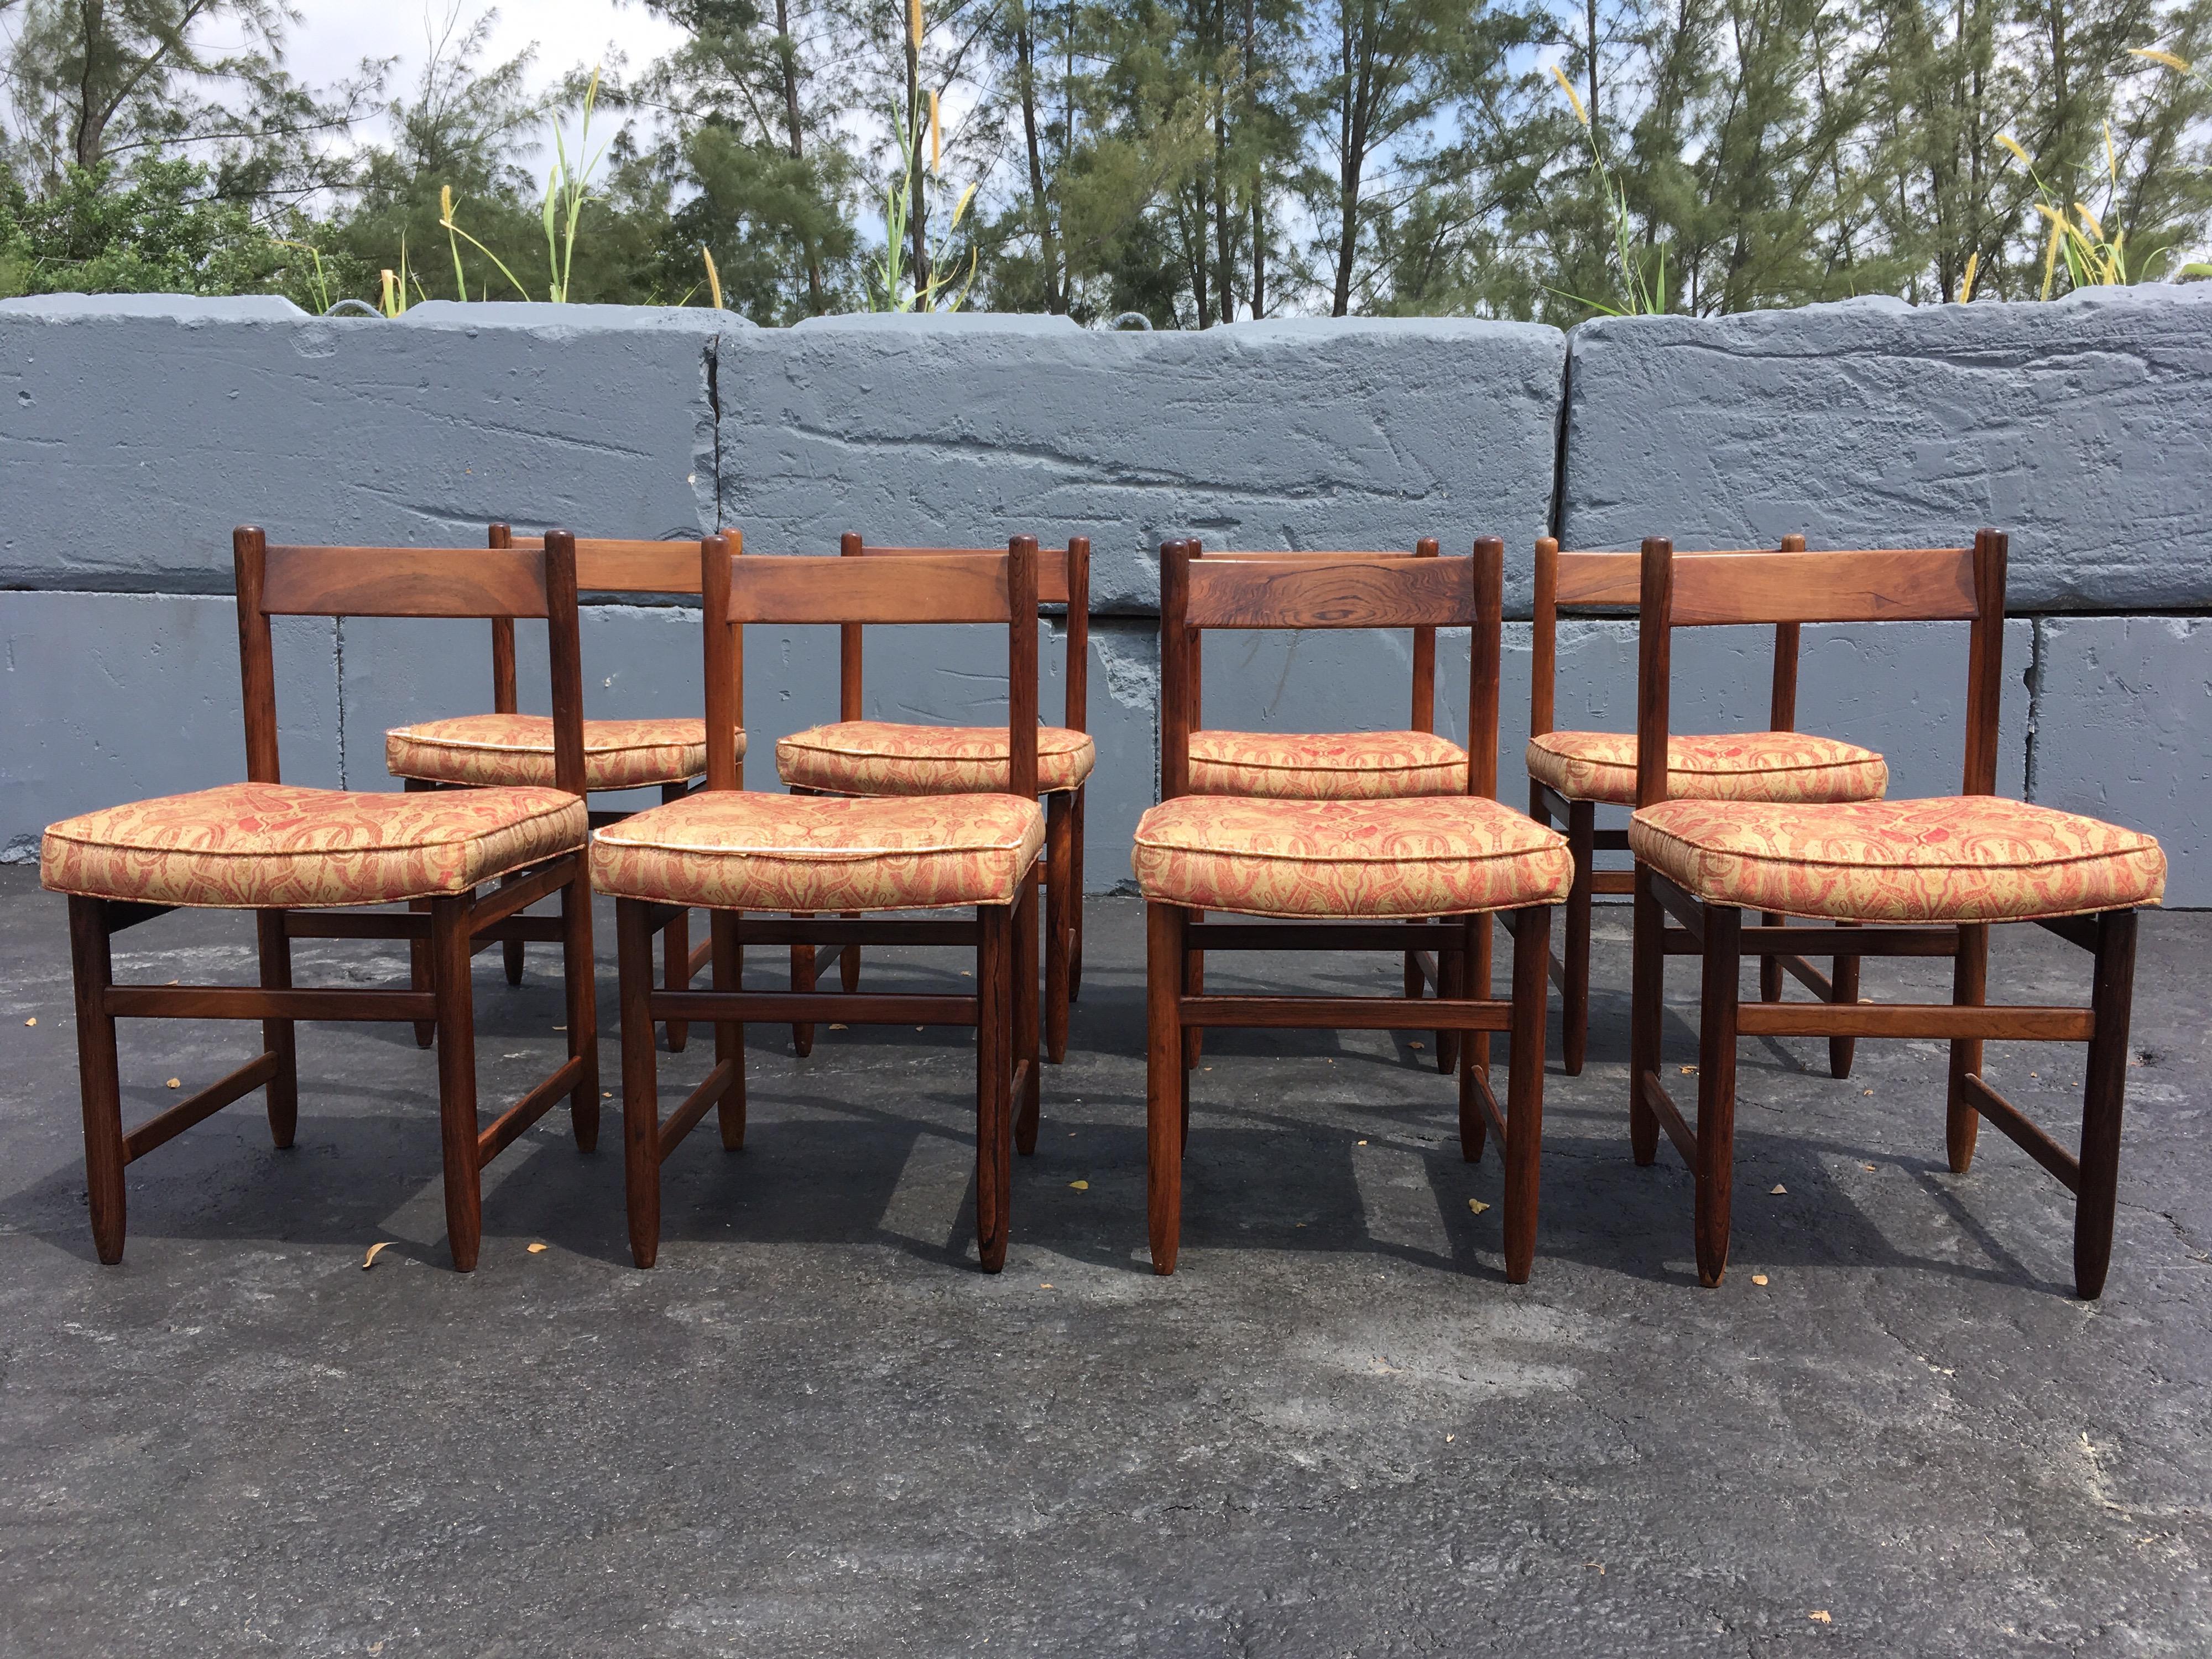 Eight solid rosewood chairs designed by Sergio Rodrigues. Chairs need to be recovered, we can help.
Frames are in good condition and will be cleaned and oiled for buyer.